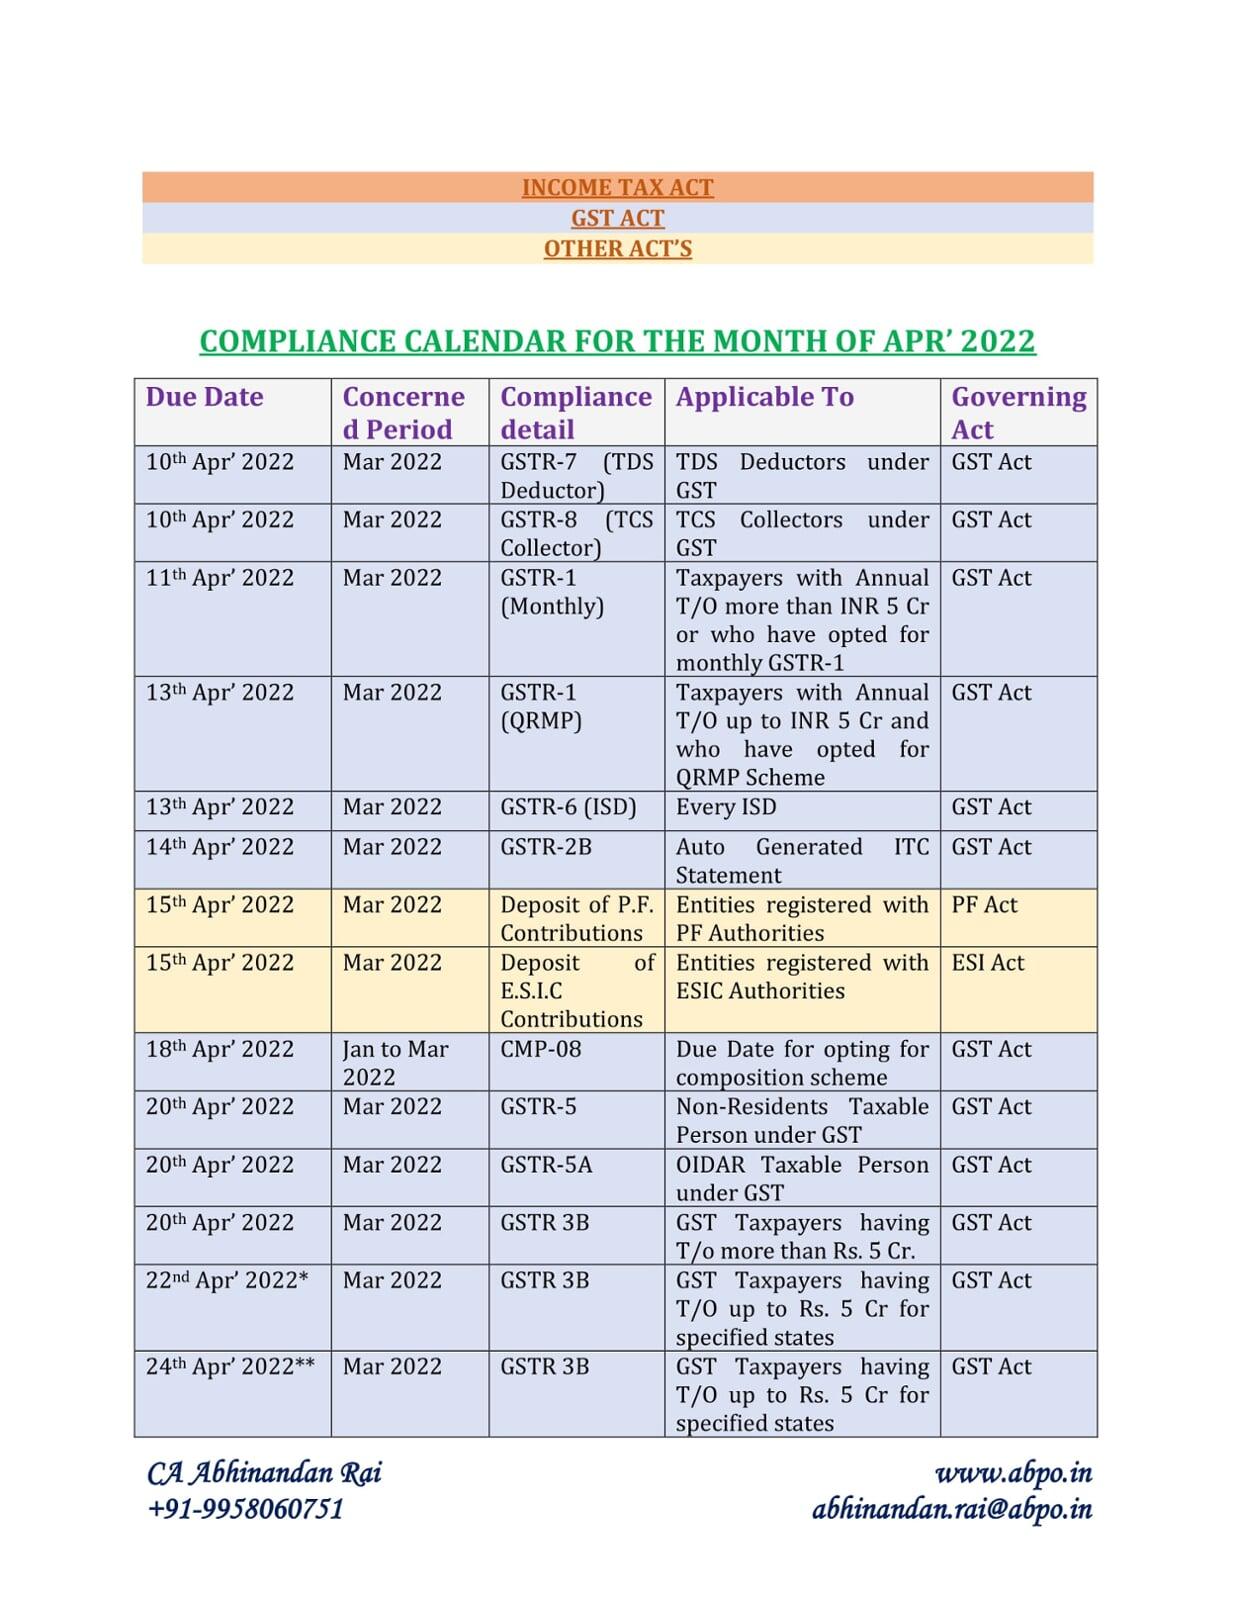 COMPLIANCE or DUE DATE CALENDAR FOR THE MONTH OF APRIL 2022